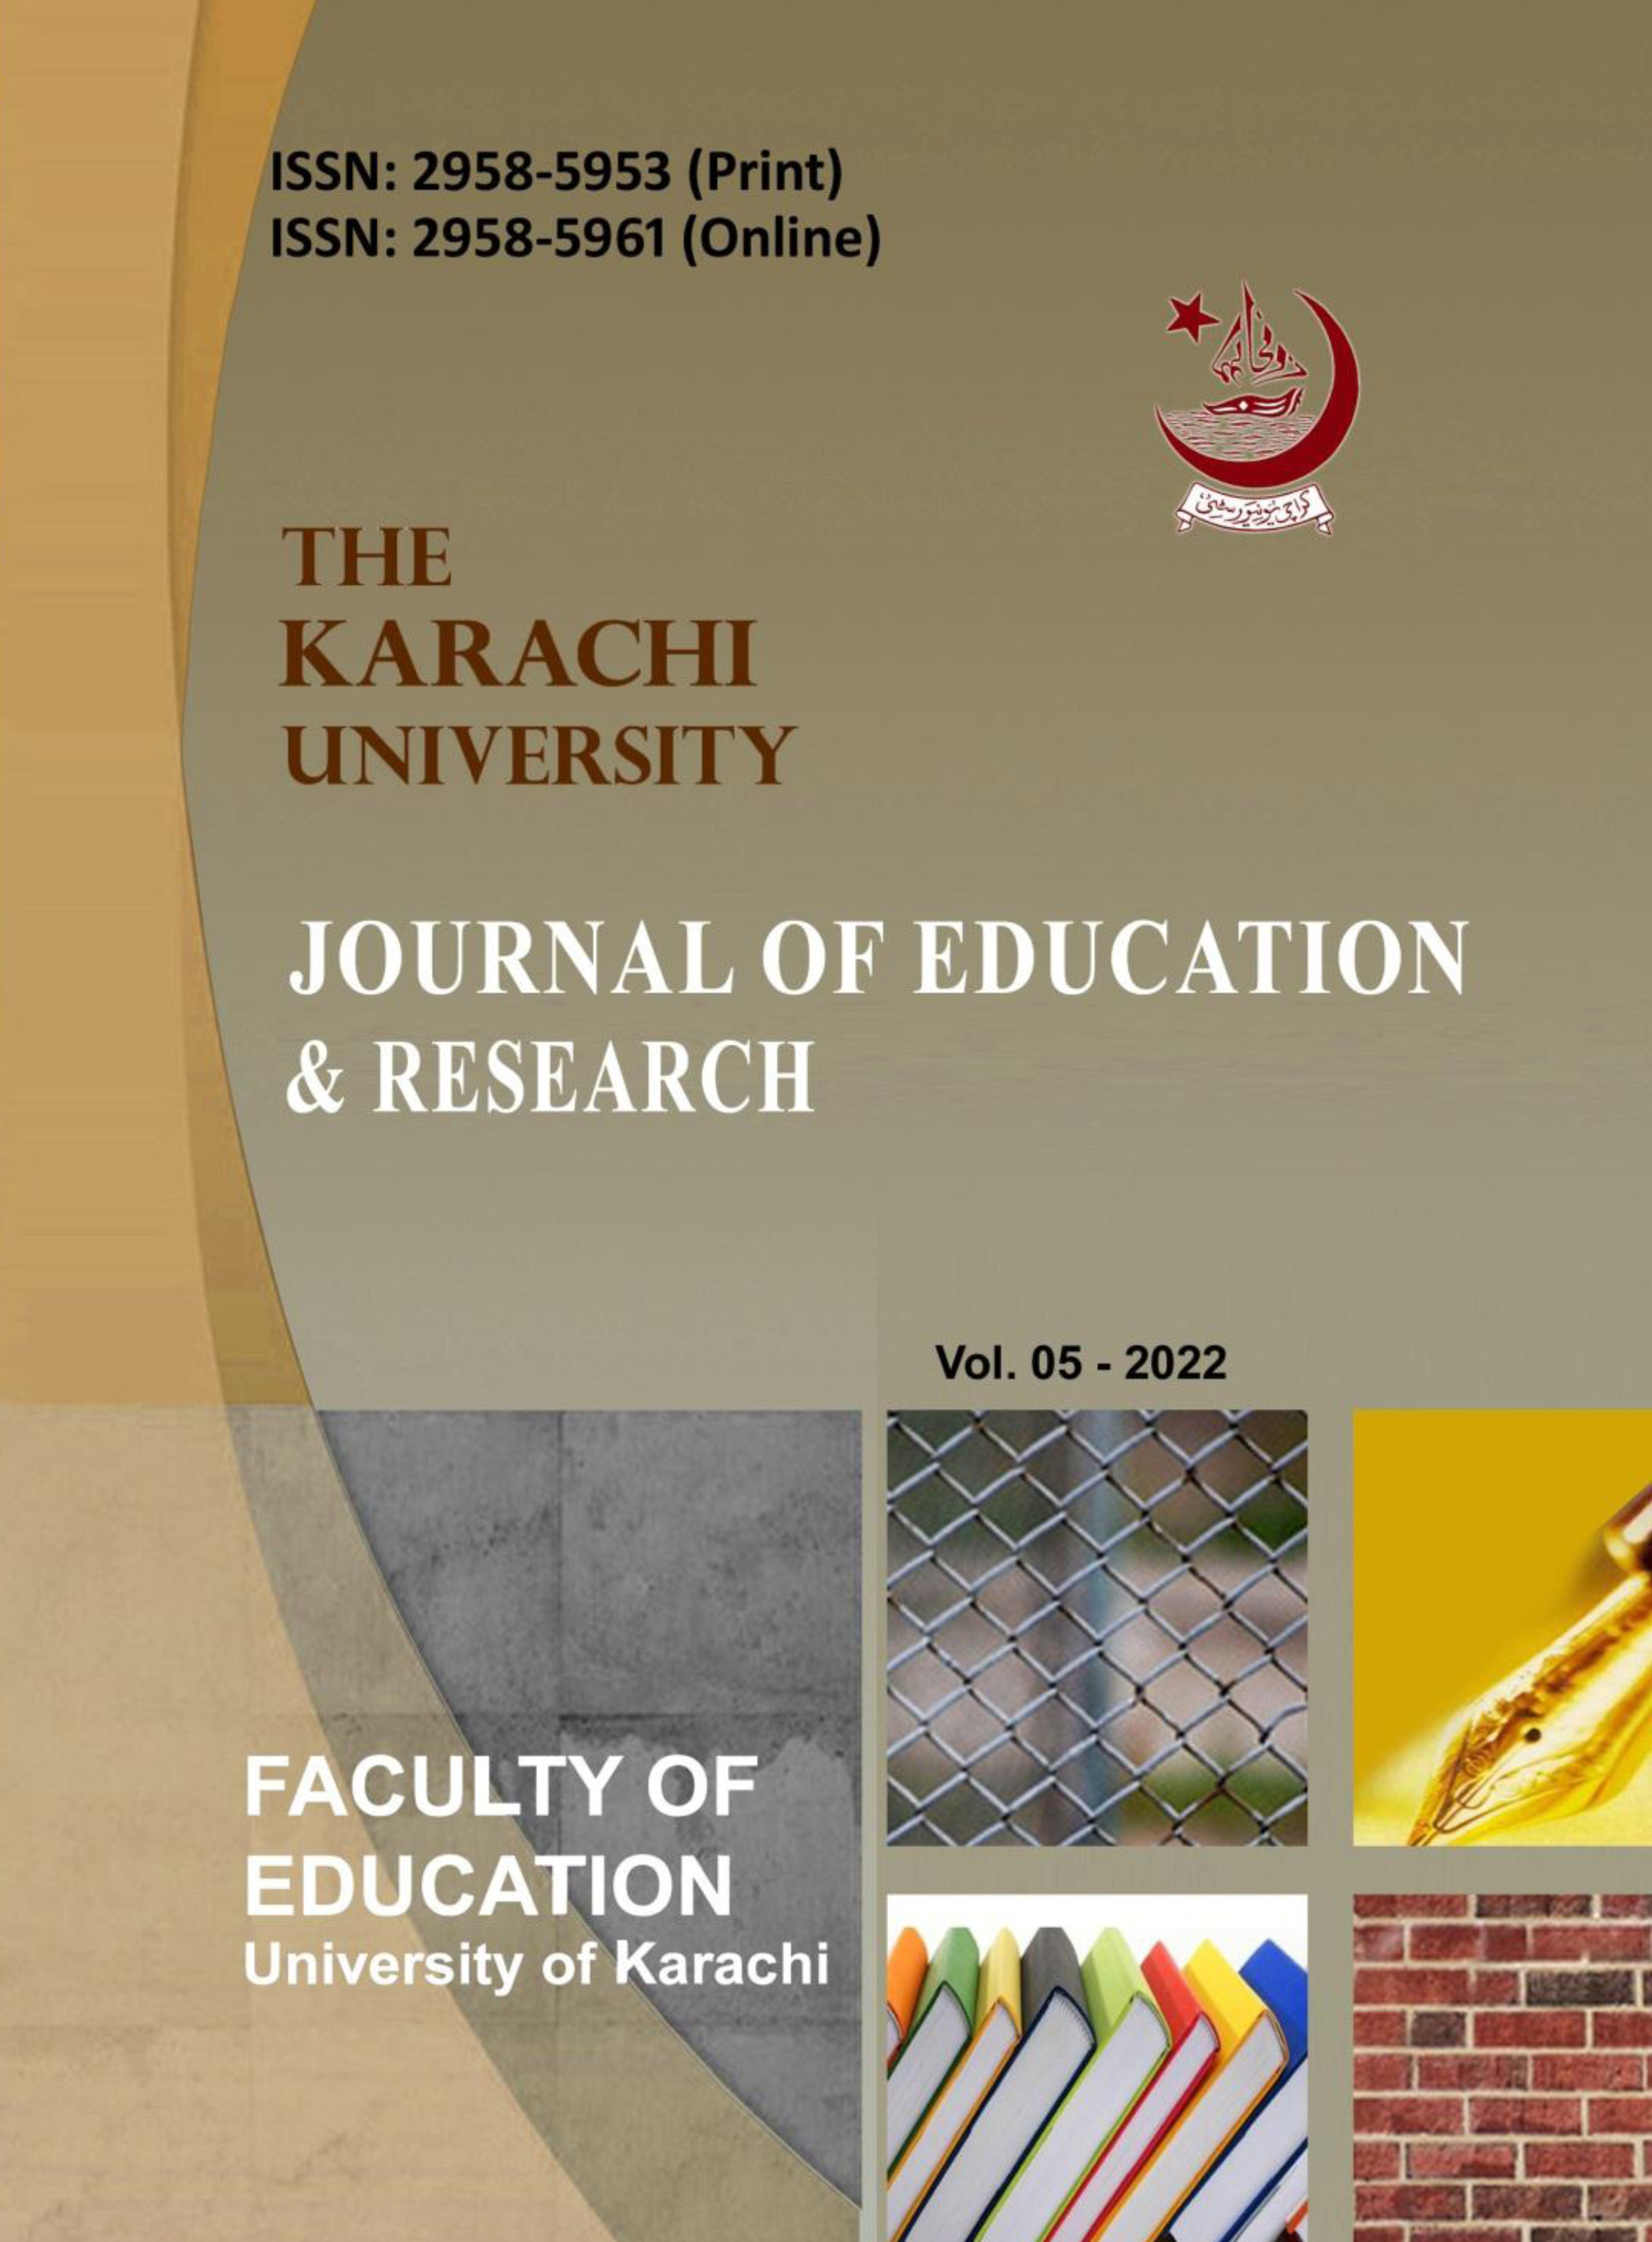 					View Vol. 6 No. 2958-5953 (2022): The Karachi University Journal of Education & Research 2022 With ISSN : TKUJER22
				